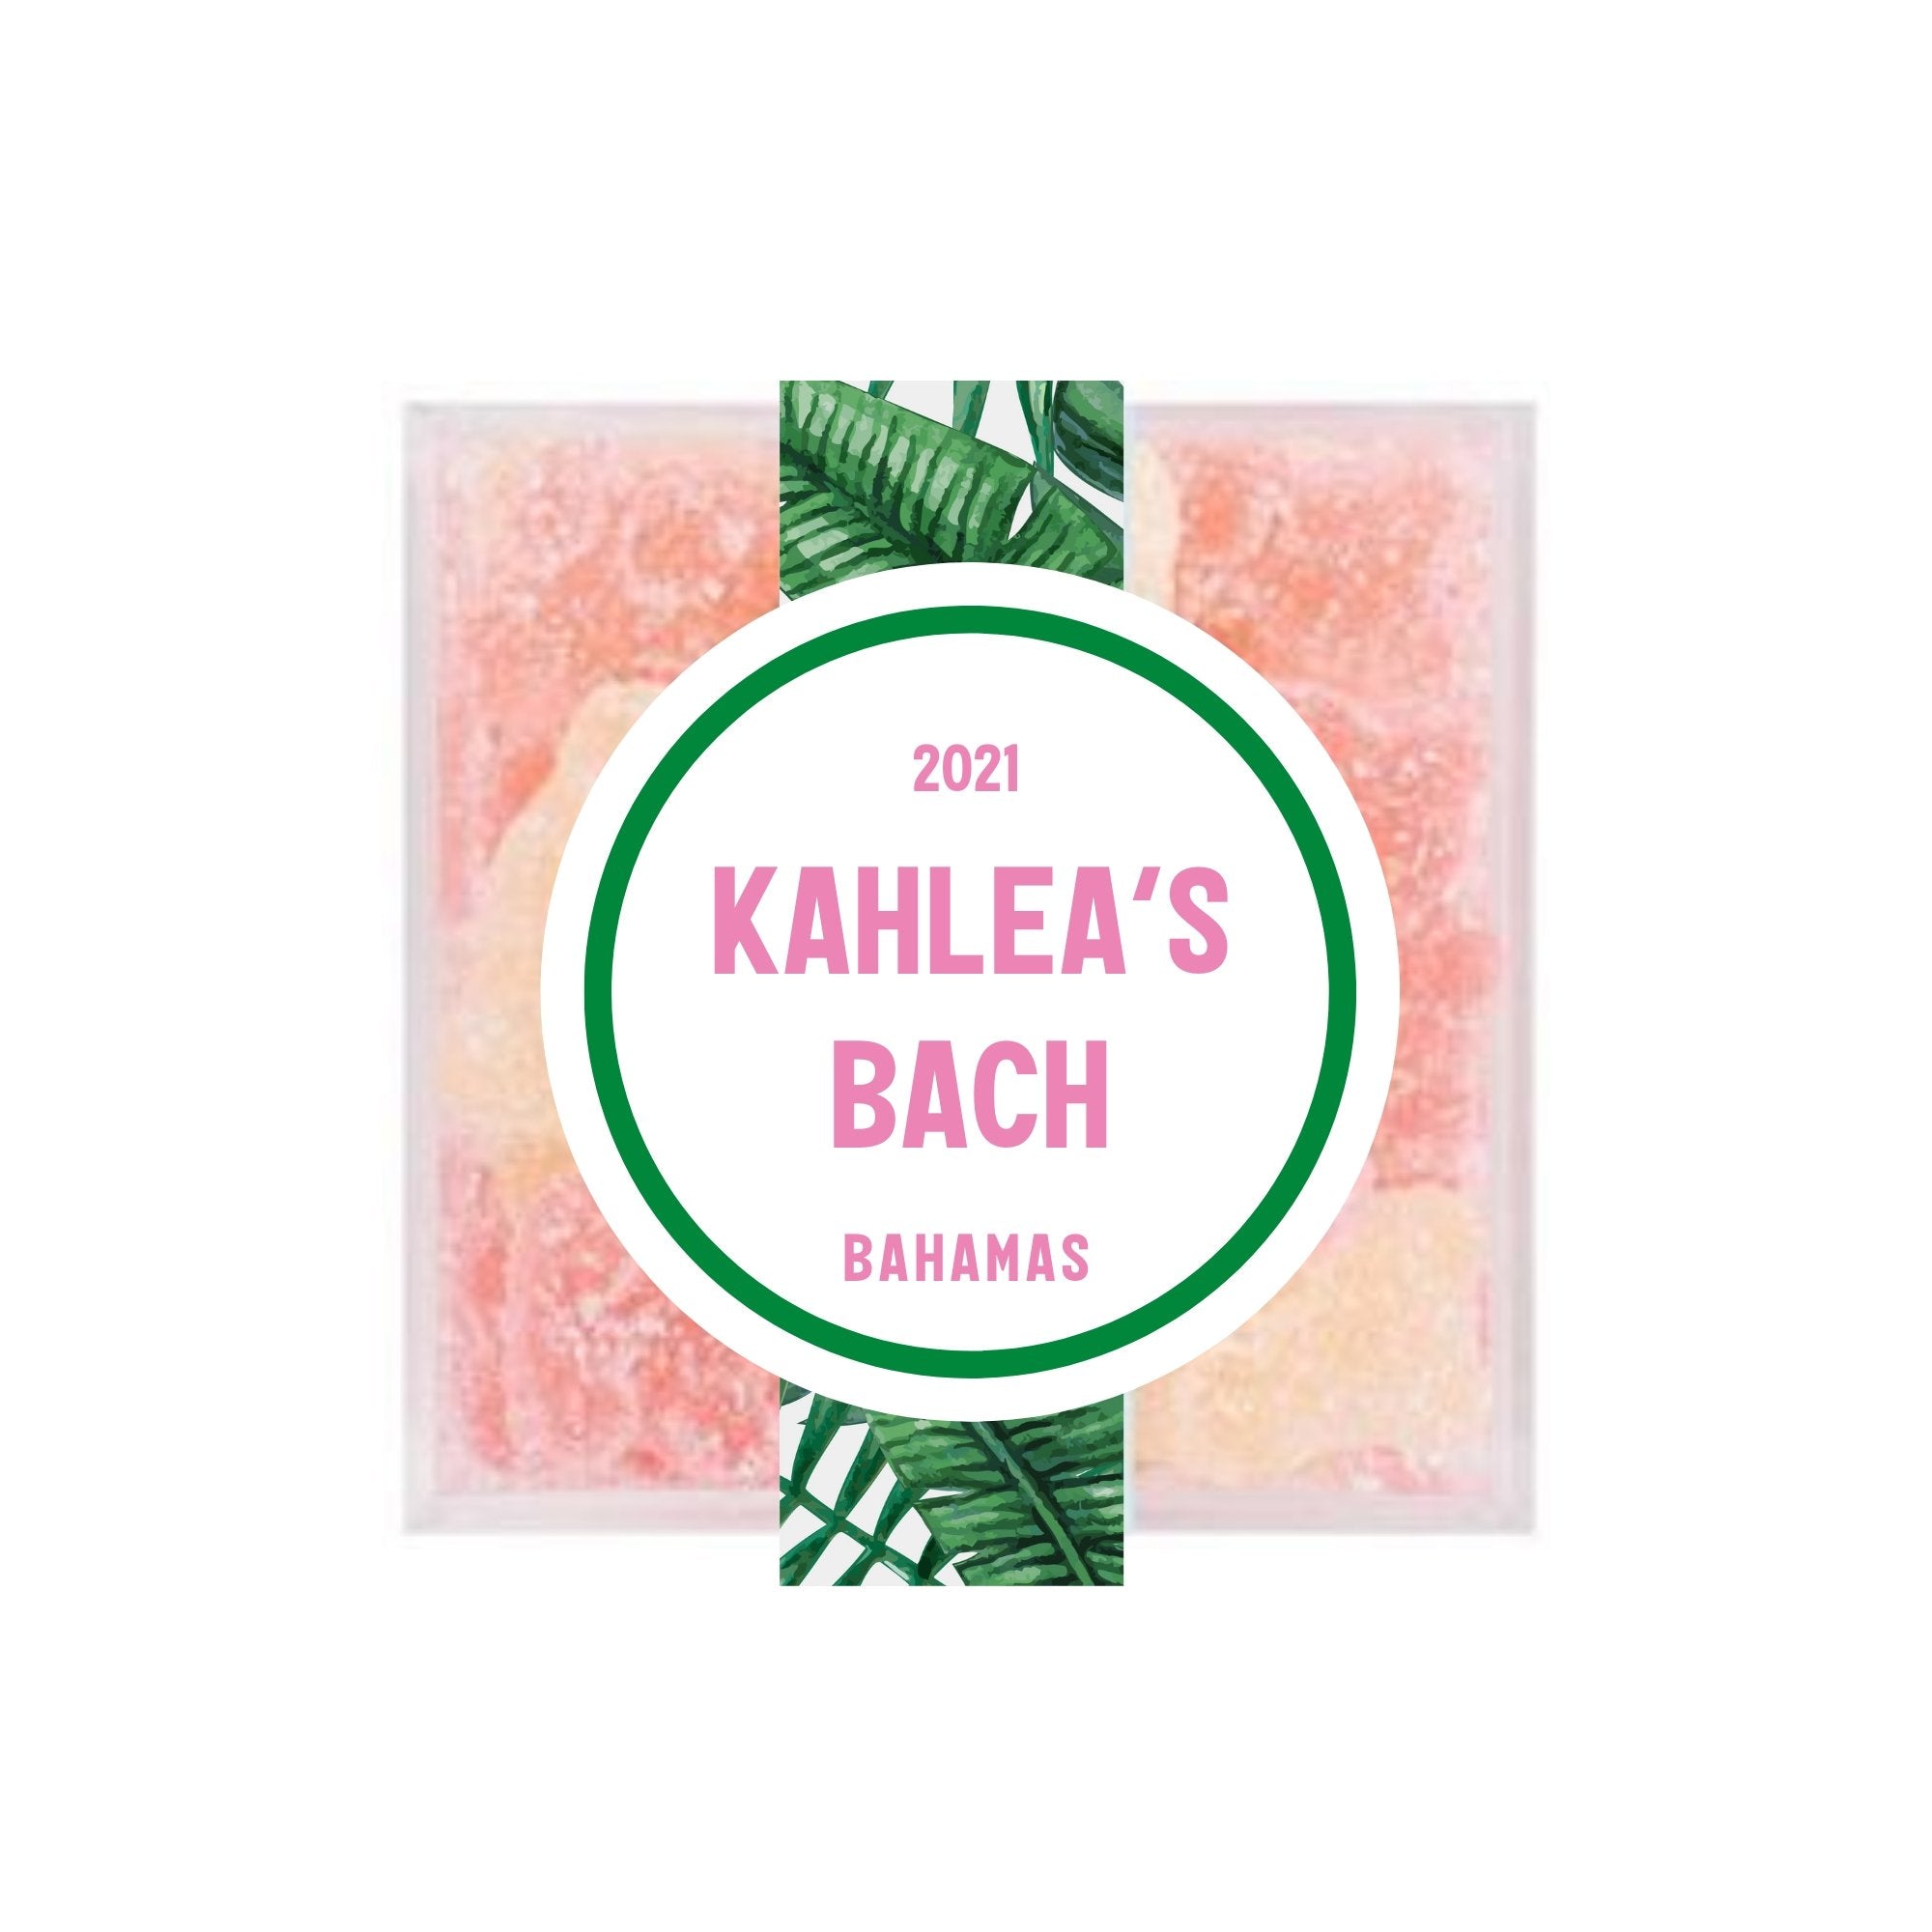 A candy box is customized with a label for a bachelorette in the Bahamas